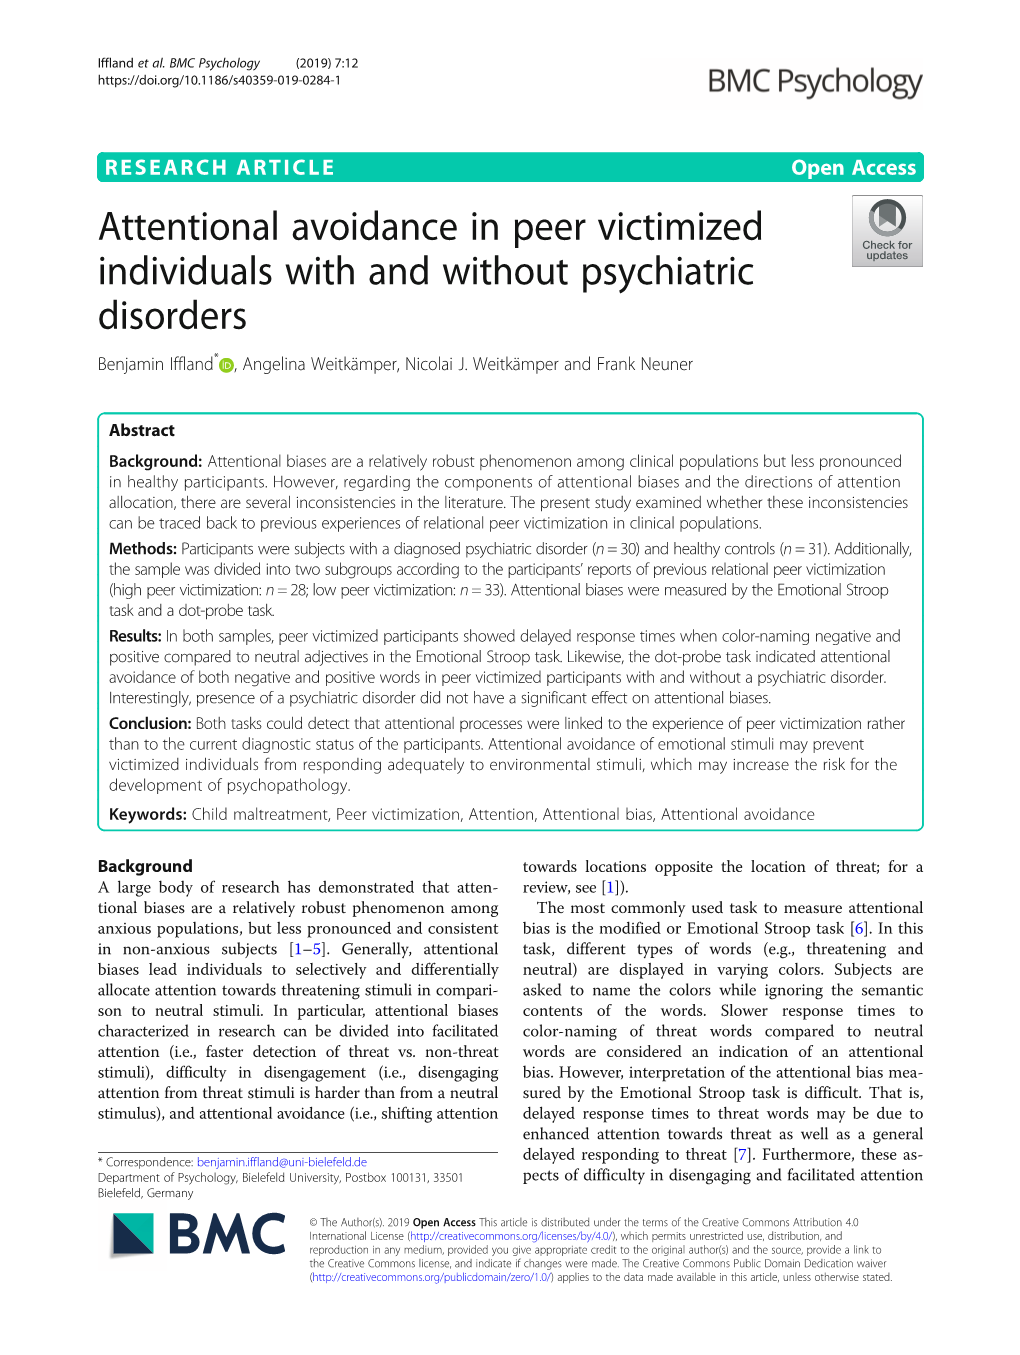 Attentional Avoidance in Peer Victimized Individuals with and Without Psychiatric Disorders Benjamin Iffland* , Angelina Weitkämper, Nicolai J